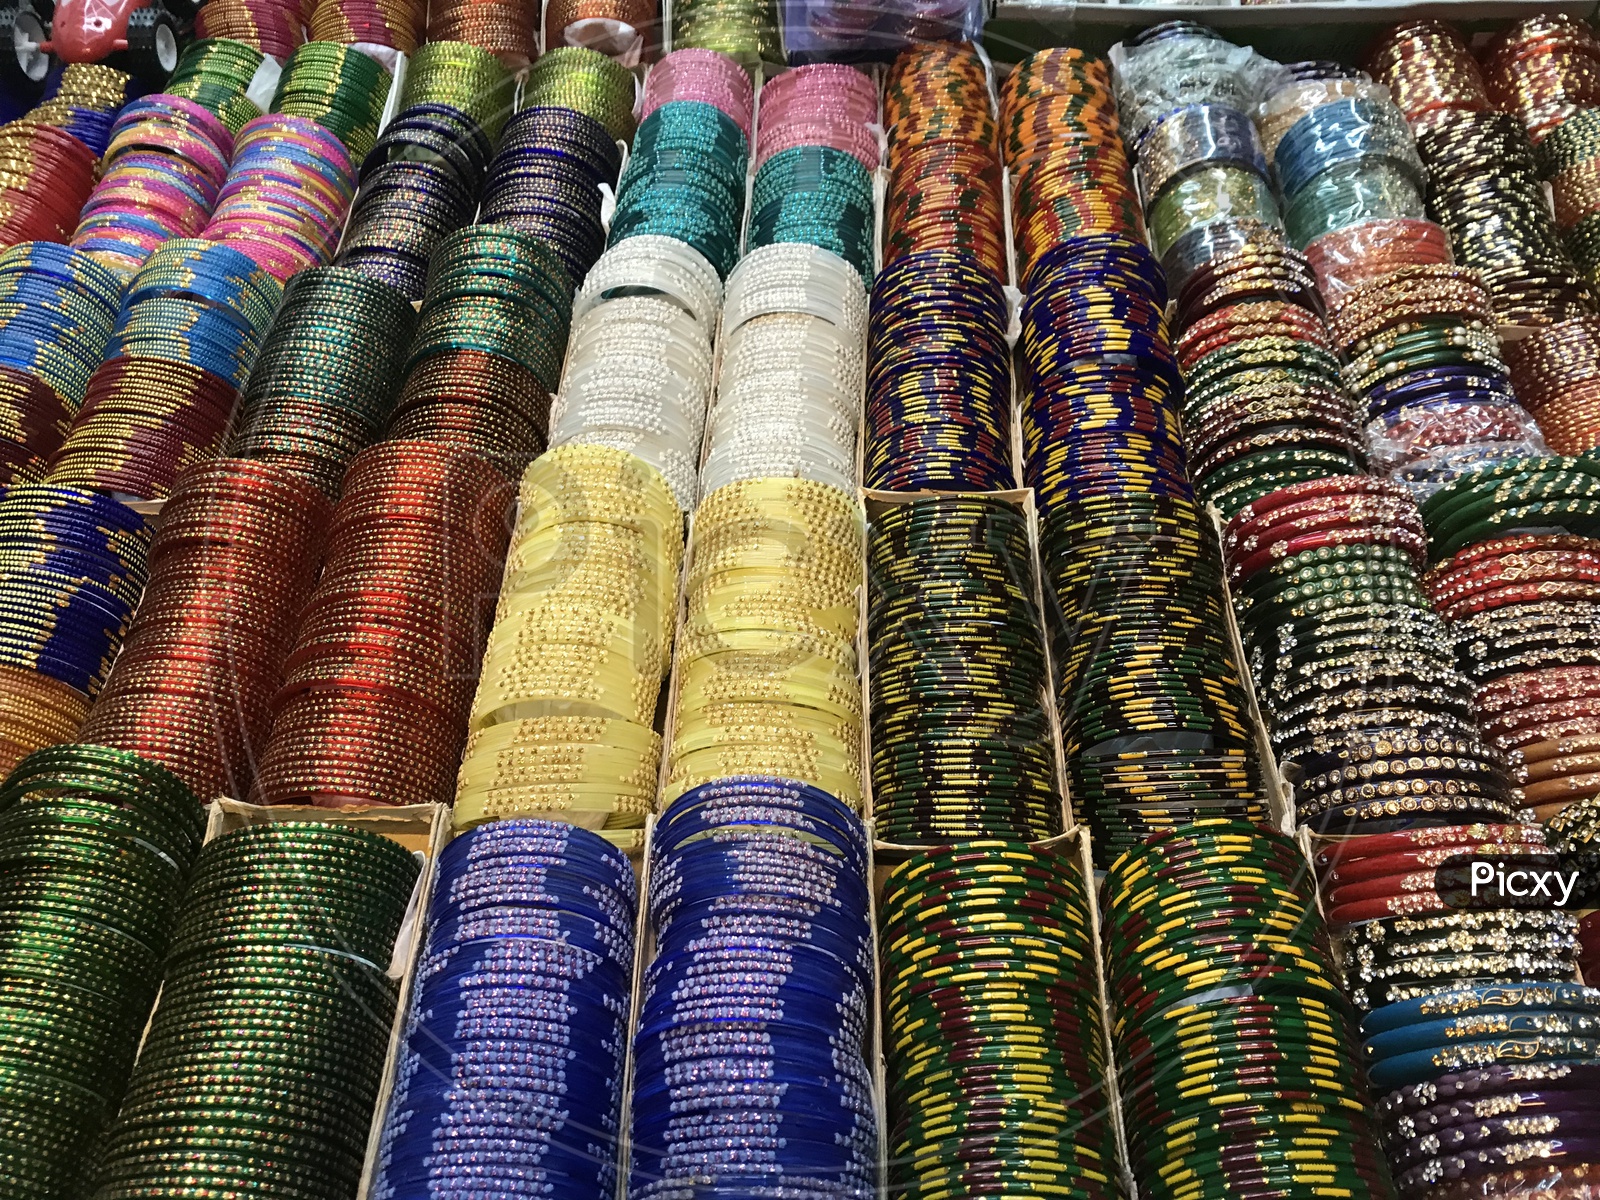 Colorful Bangles stacked up in the Bangle Store in Tiruchanur near Padamavathi temple